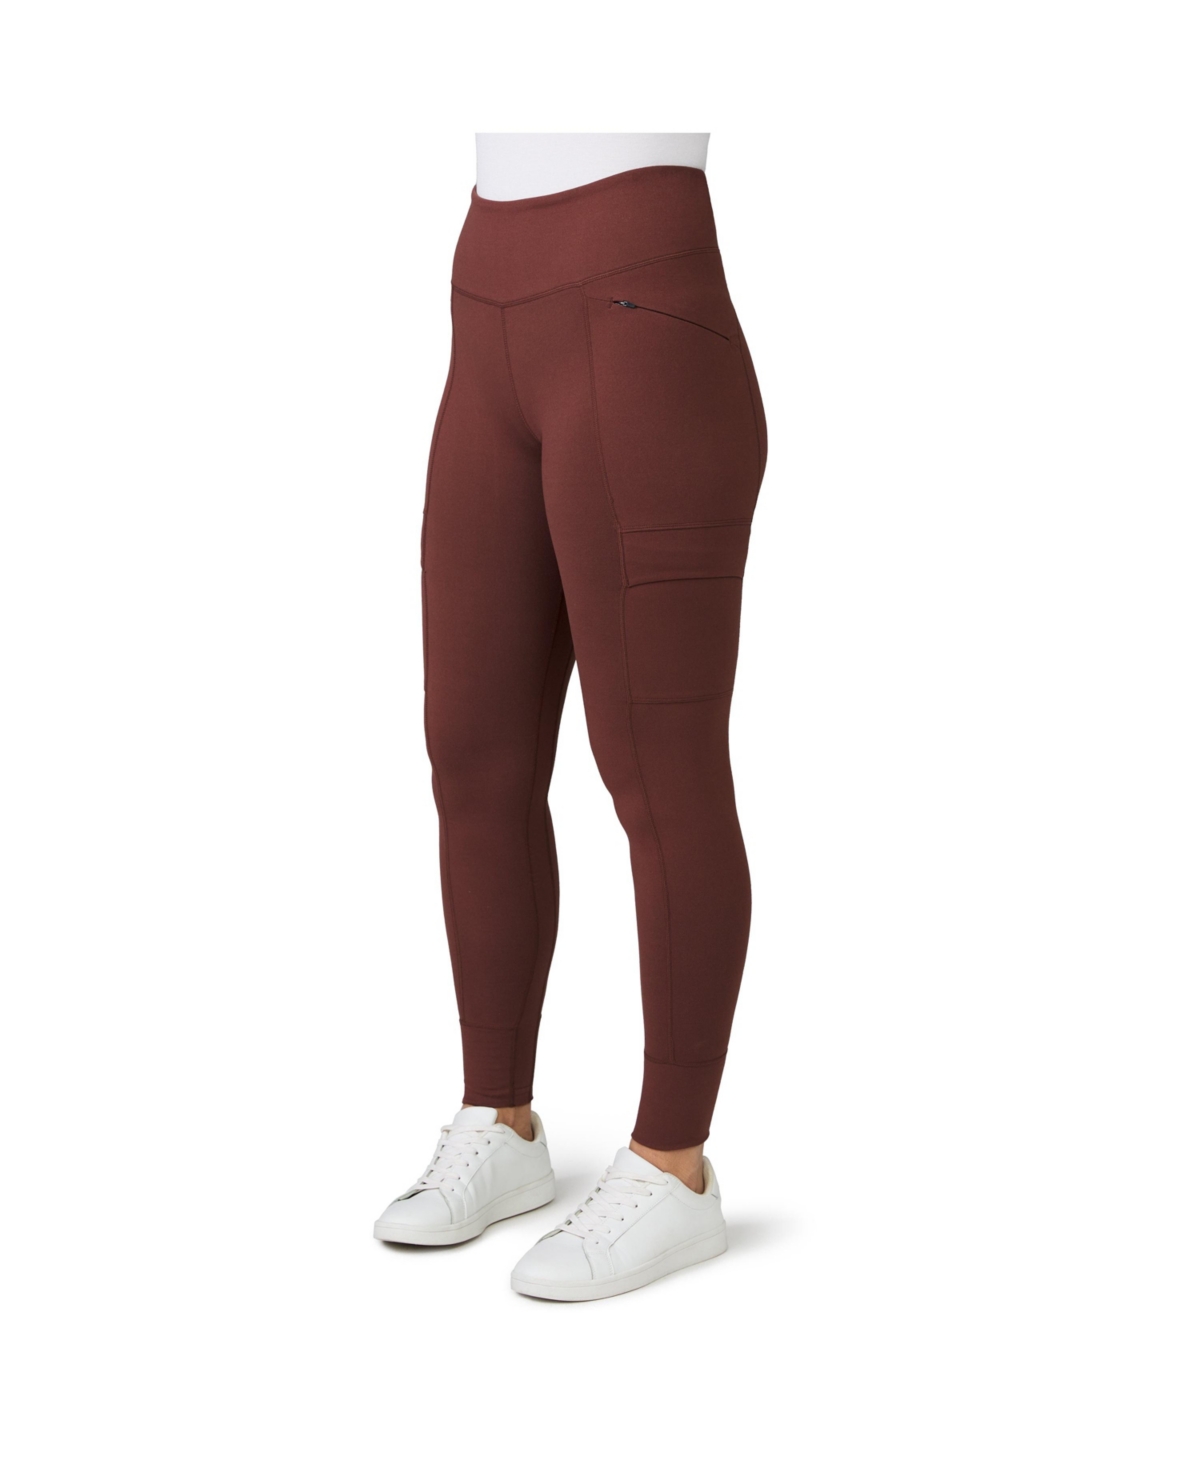 Women's Get Out There Trail Tights - Cocoa